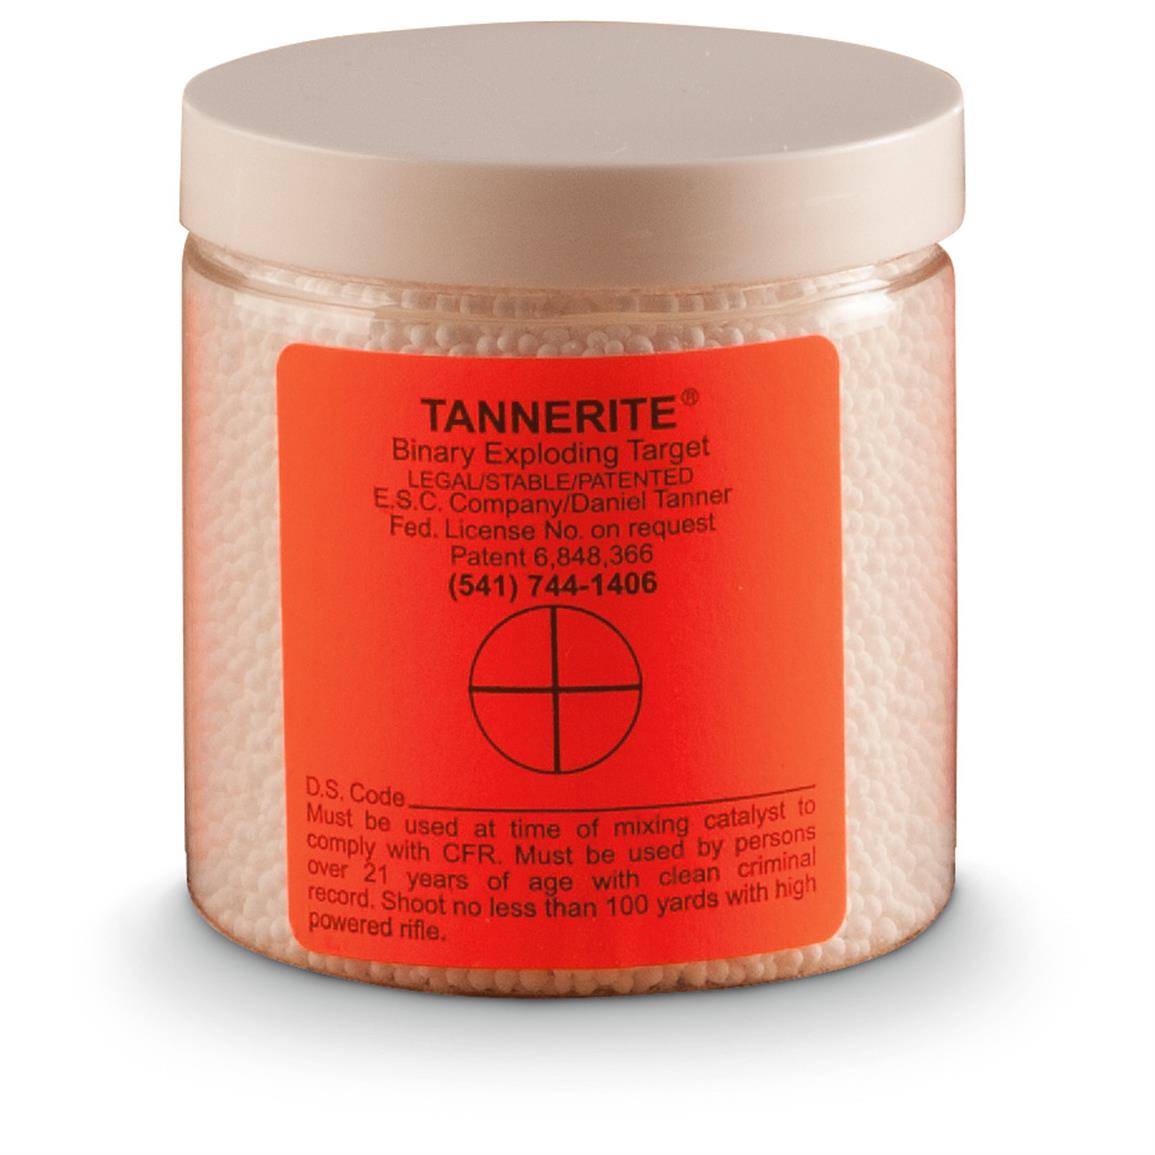 Tannerite® Exploding Binary Rifle Targets